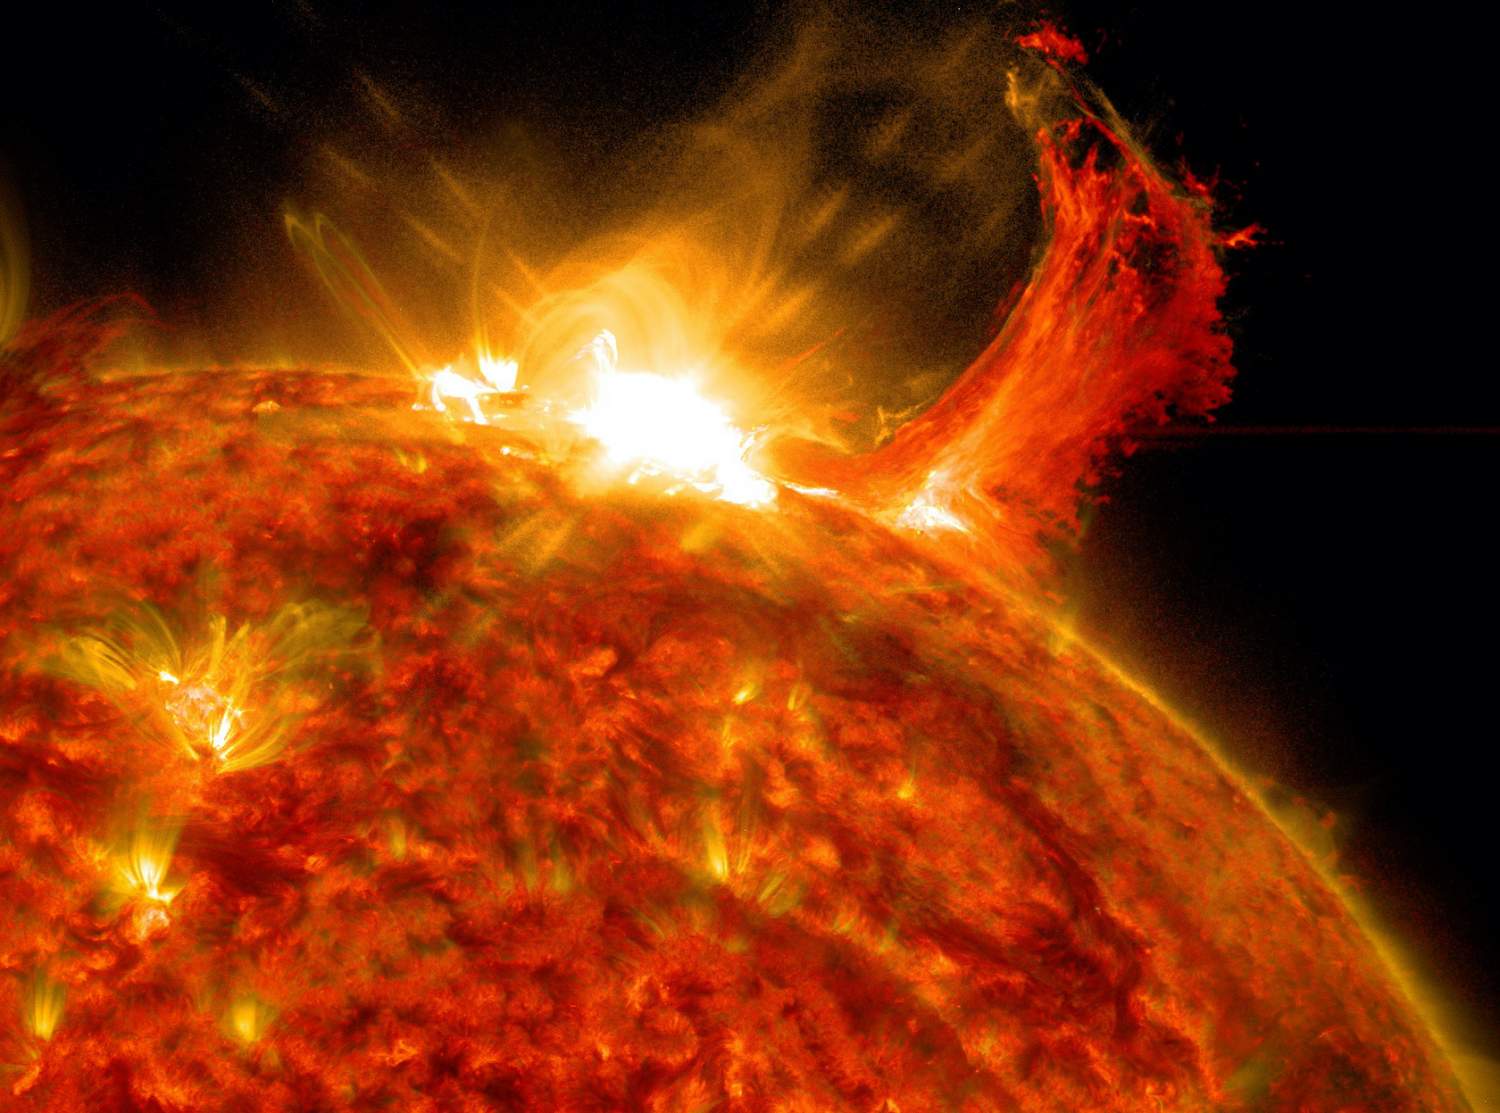 This huge Xclass solar flare shows why NASA's Sun study is so vital